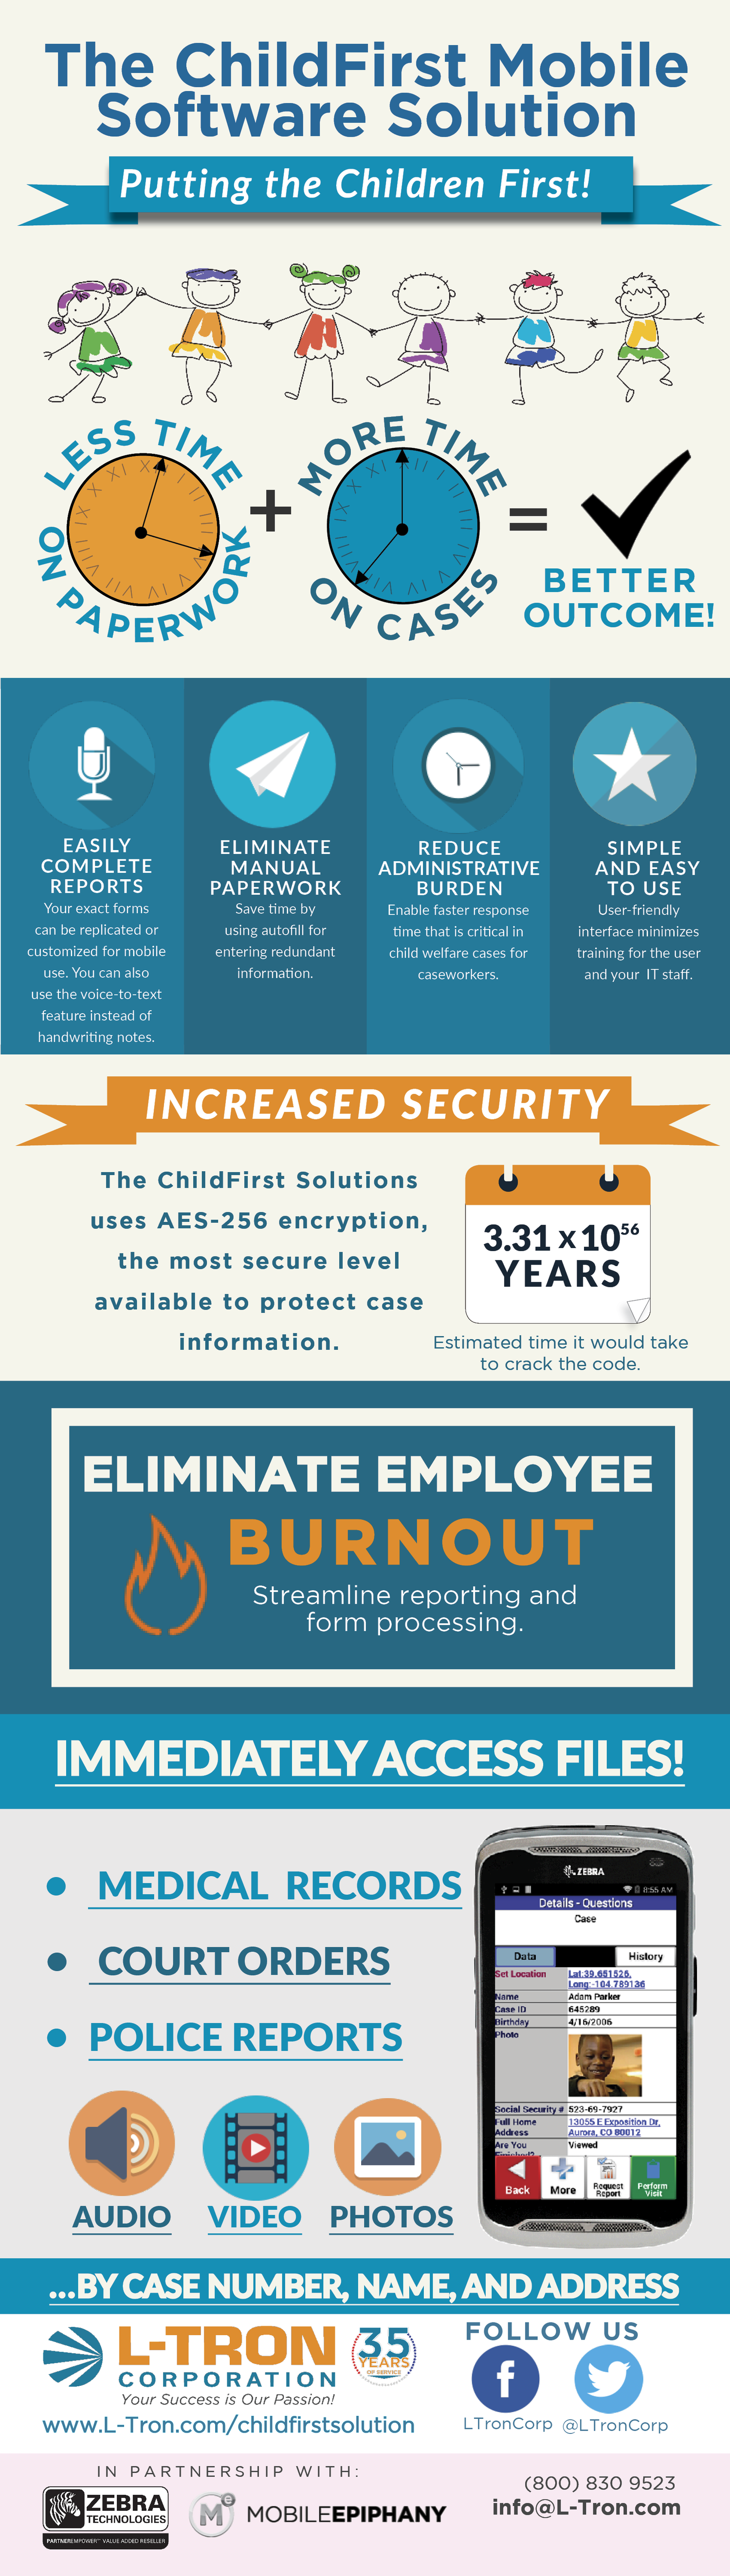 childfirst benefits infographic